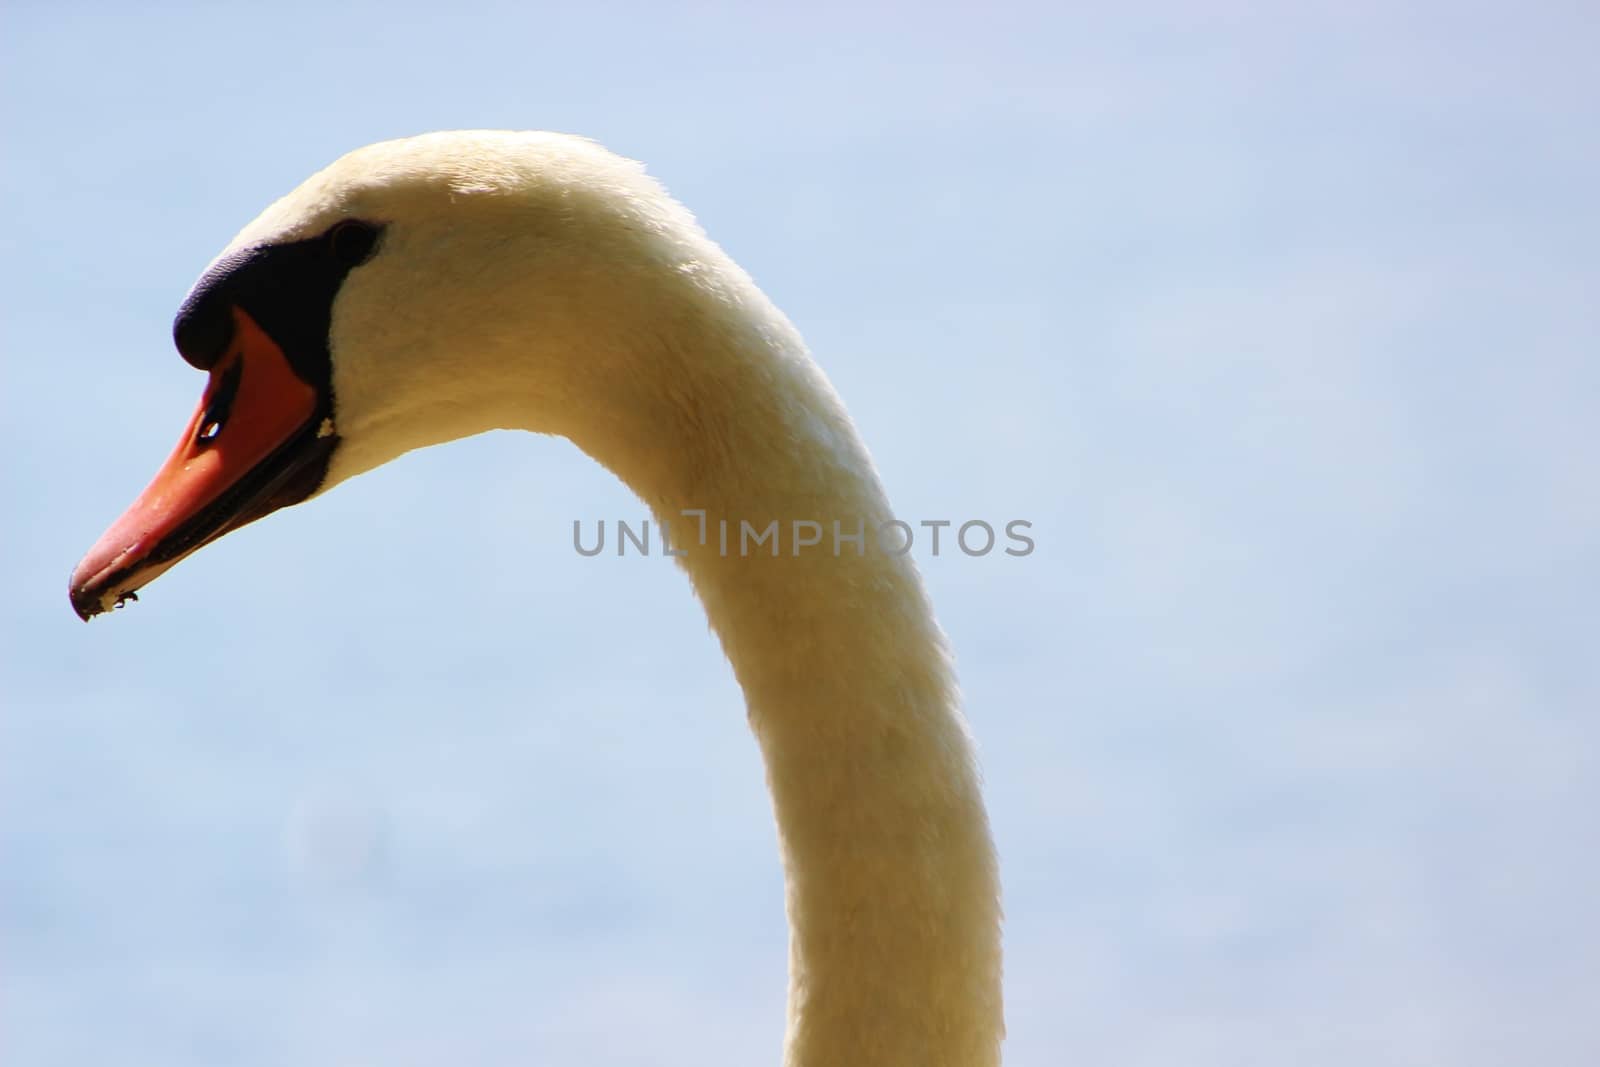 A close-up image of an adult Mute Swan.